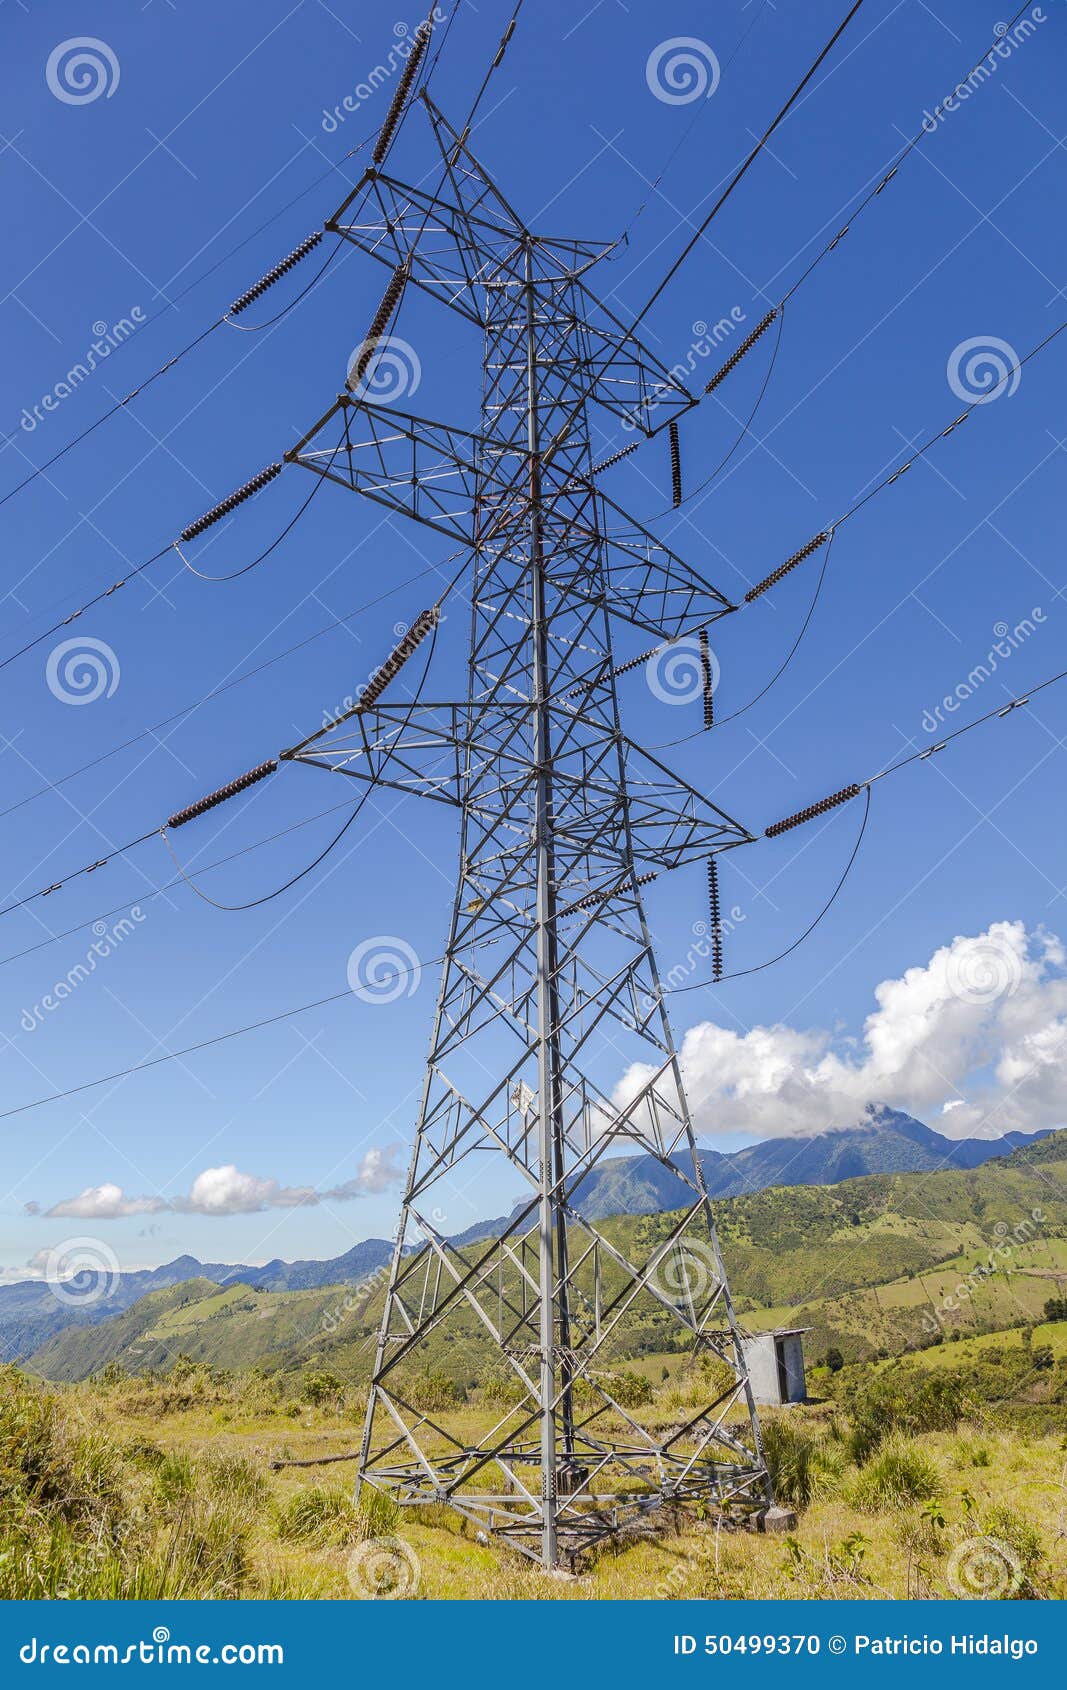 high voltage lines beneath the blue cloudy sky